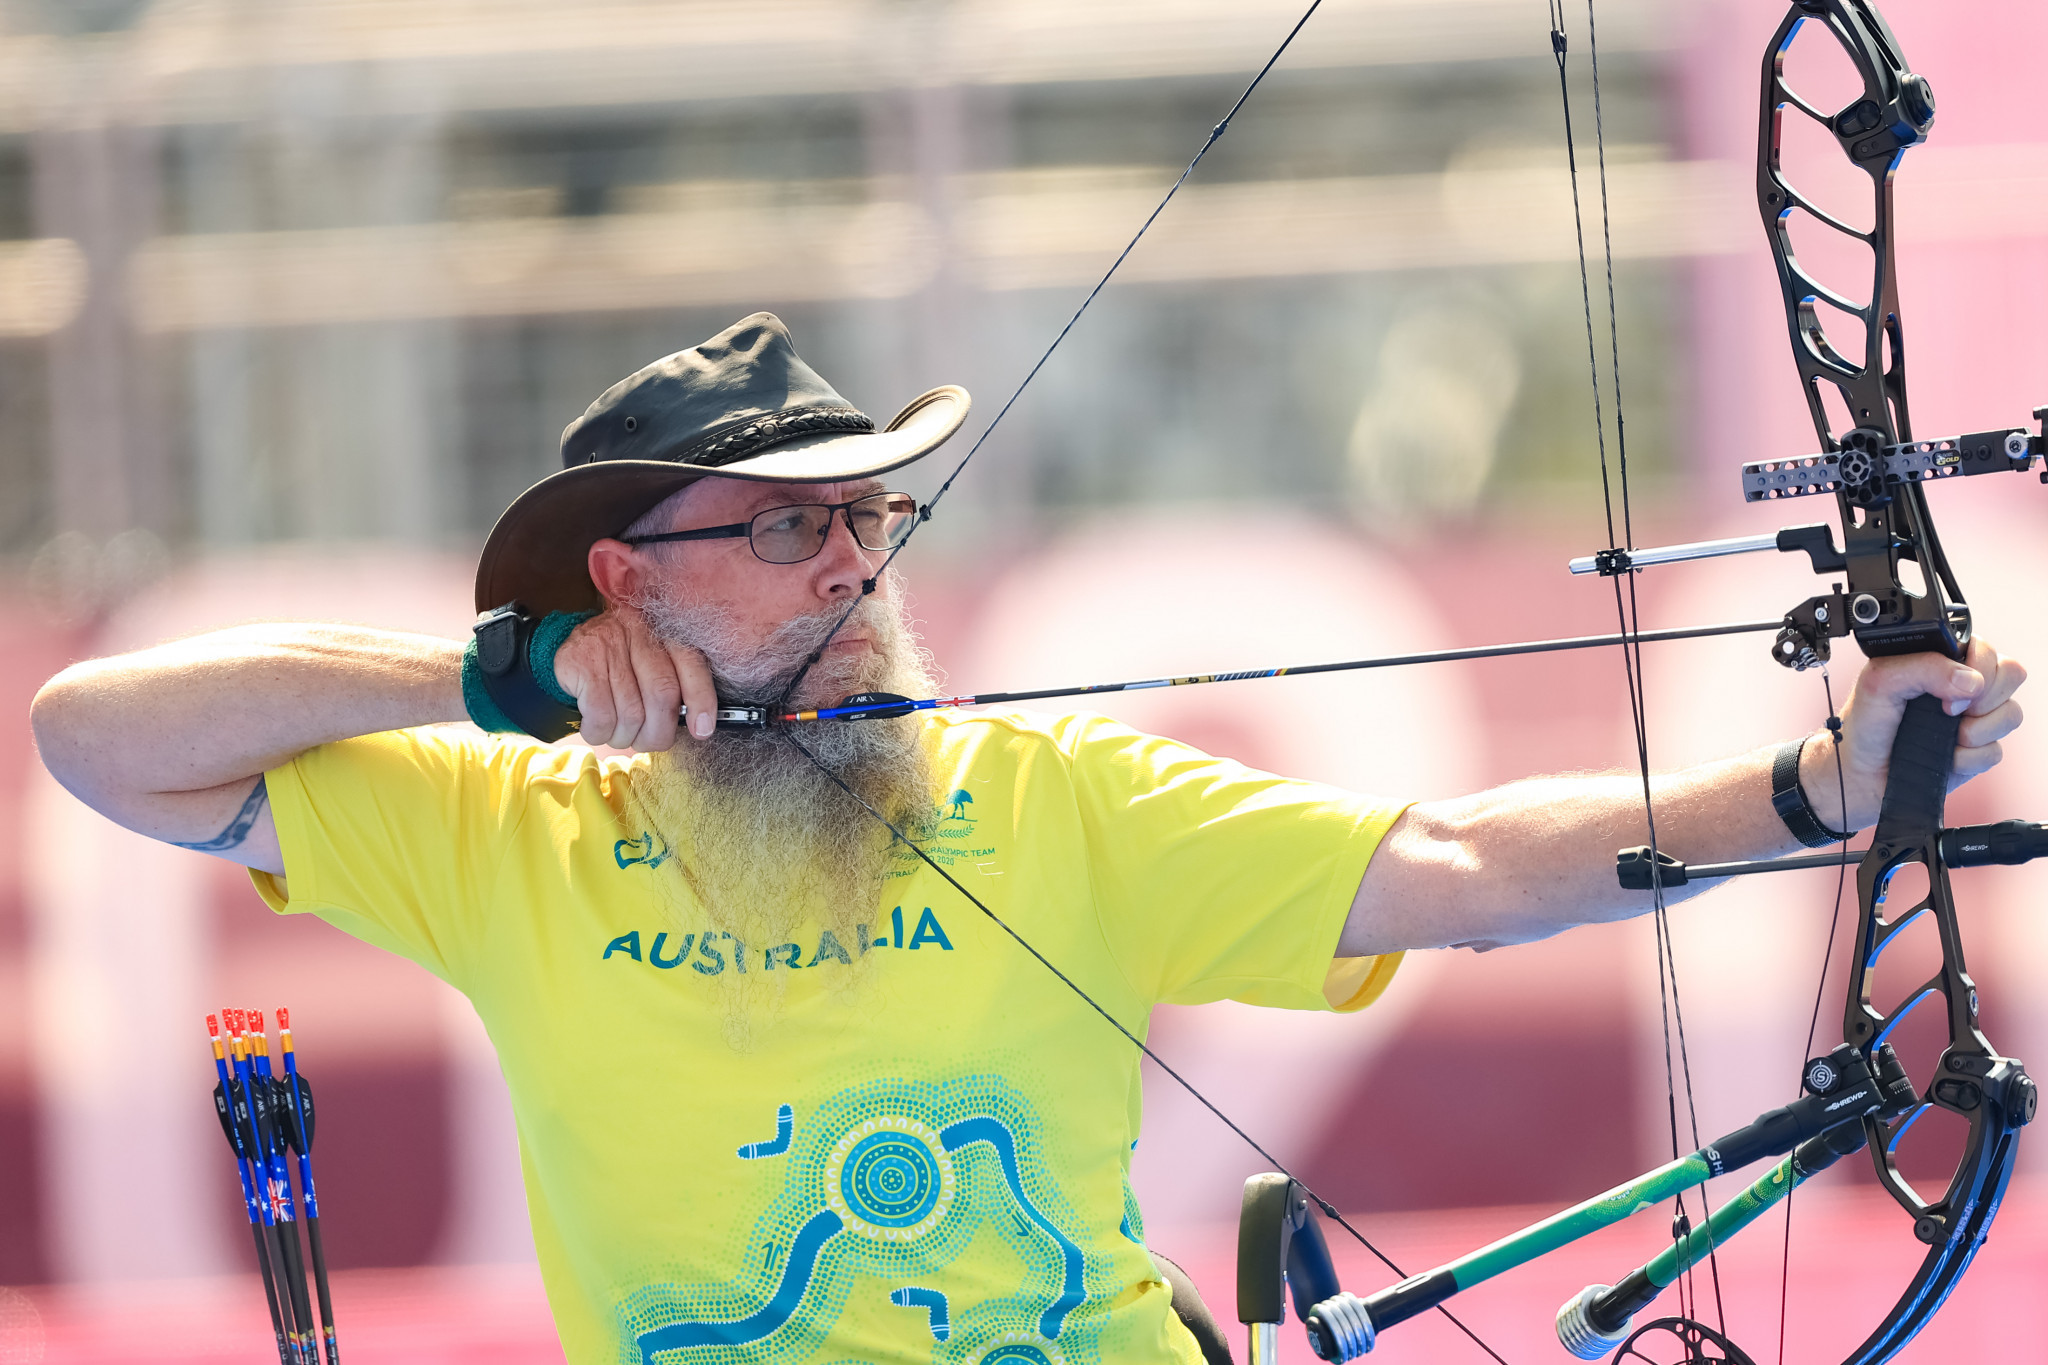 Australia took its largest-ever Paralympic archery team to Tokyo 2020 with four athletes ©Getty Images